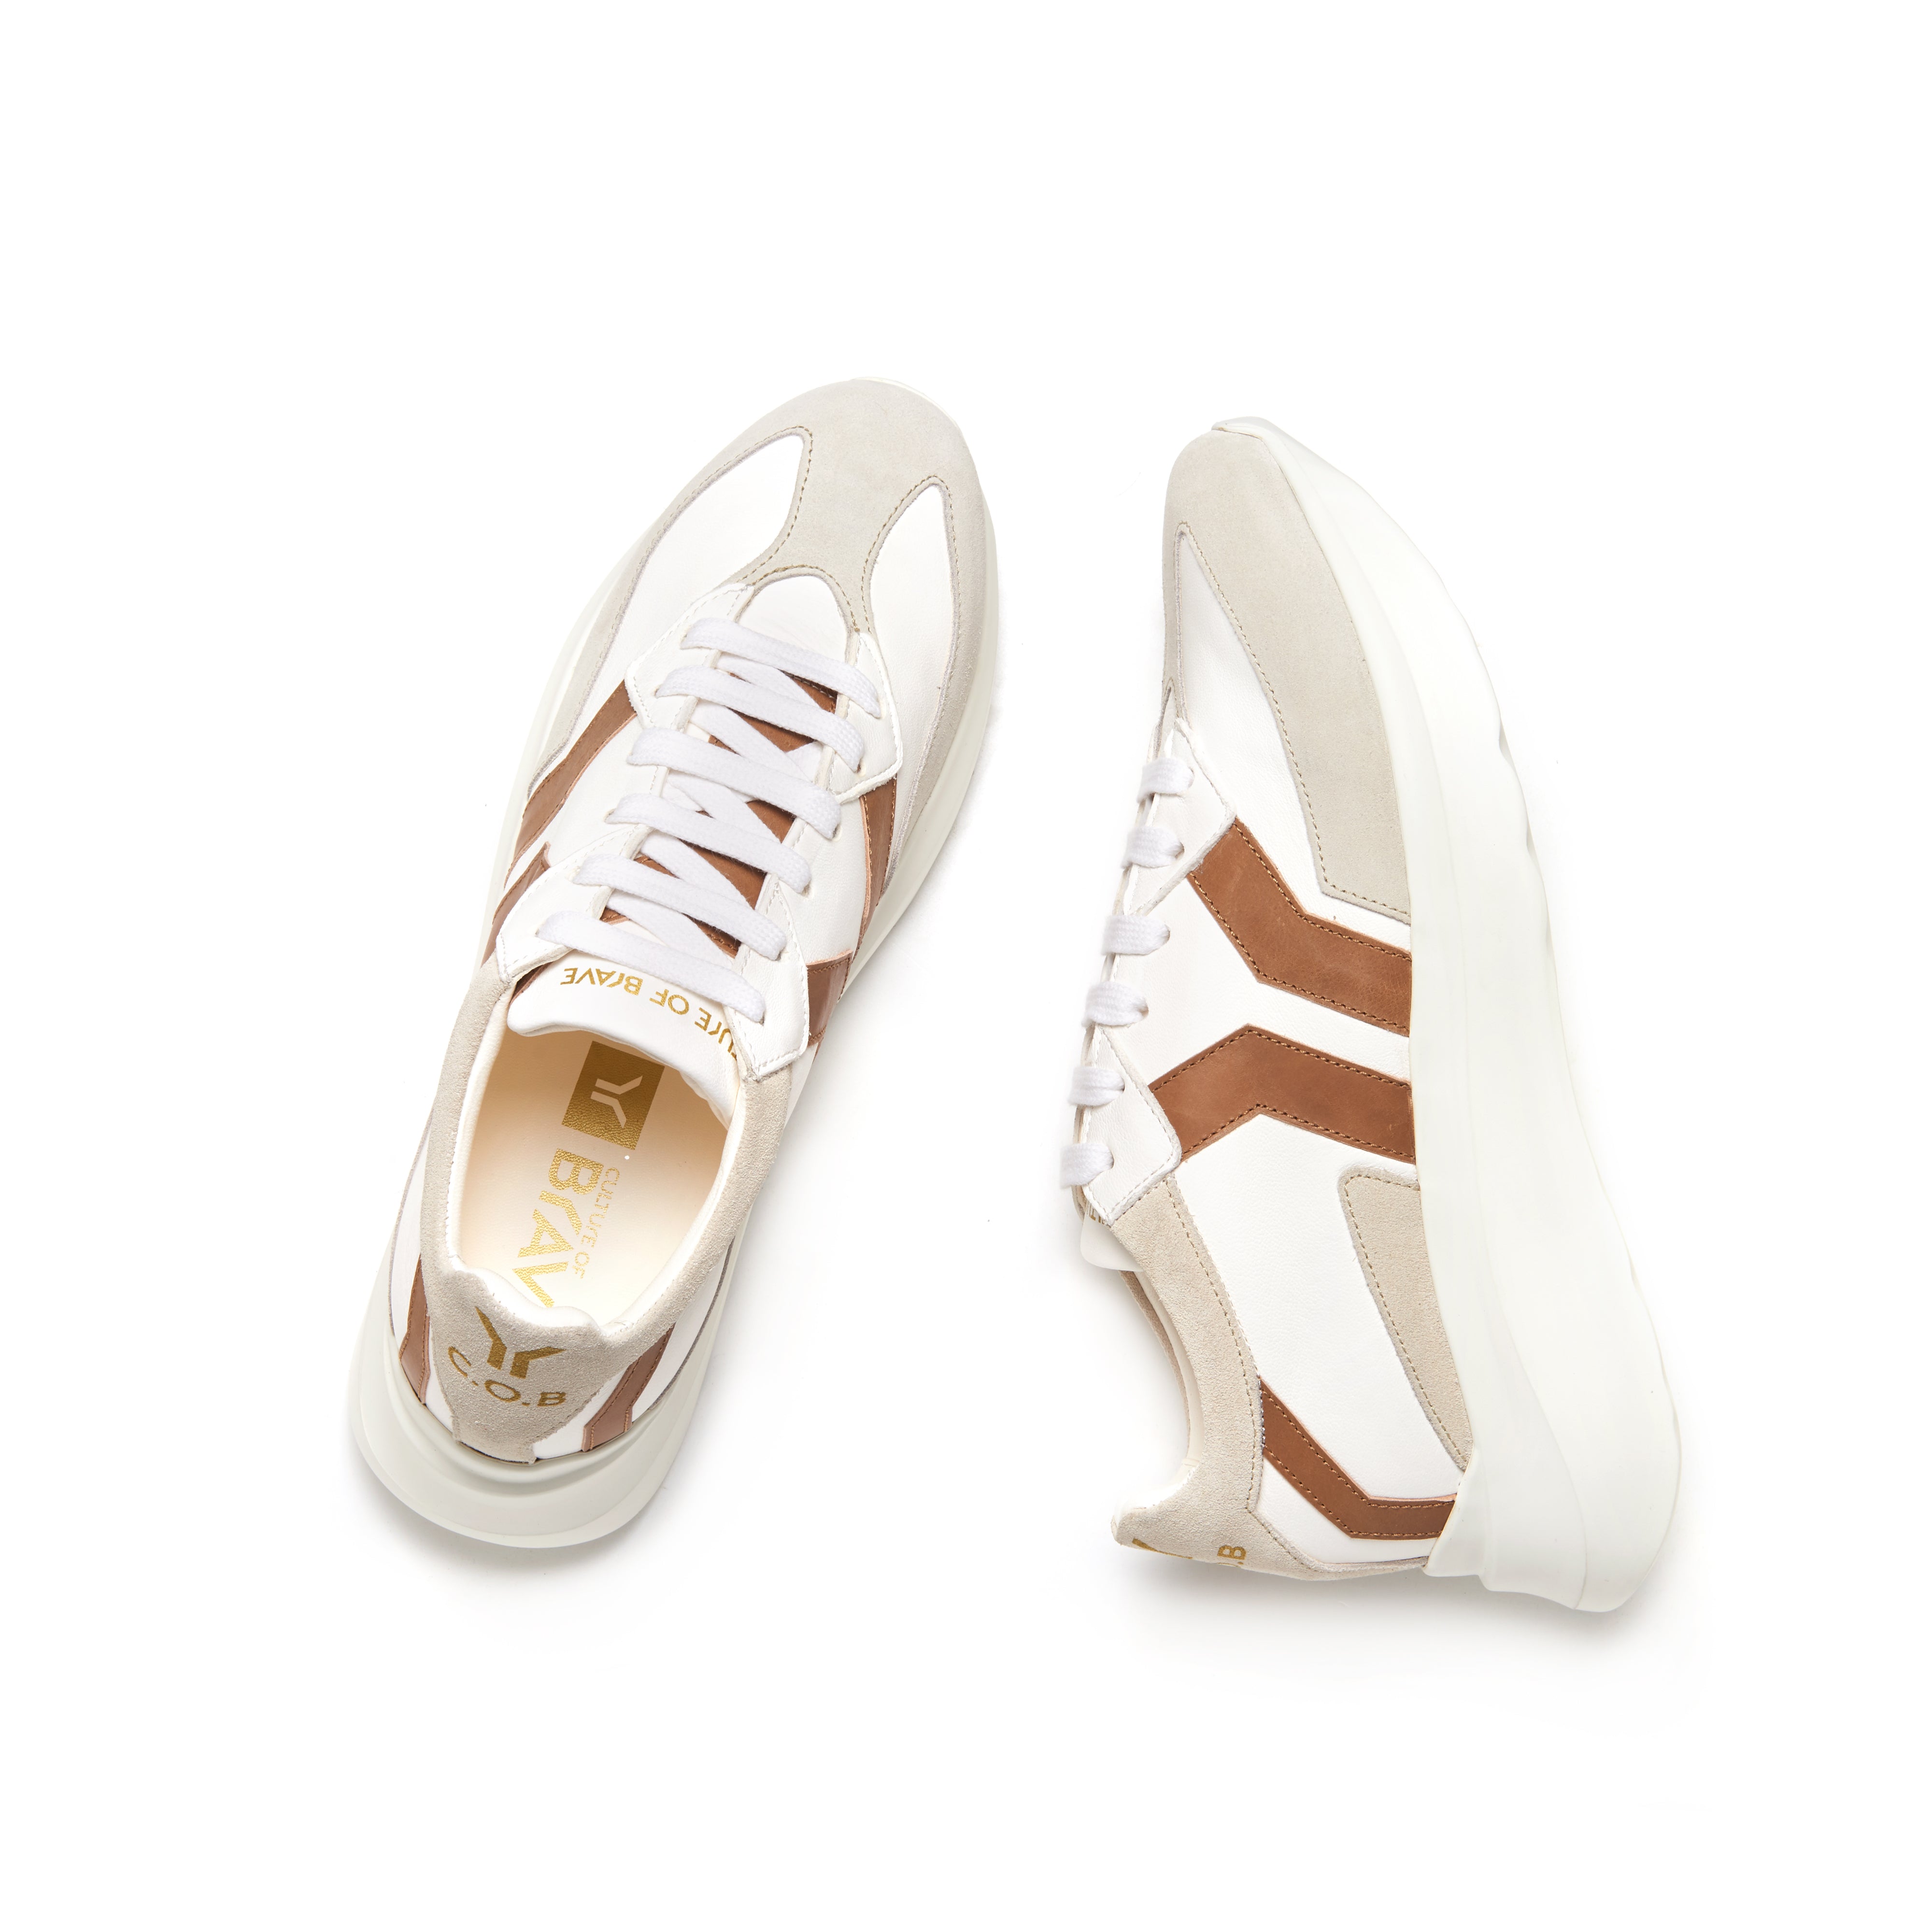 Free Soul_4 Men White leather cuoio wing low cut